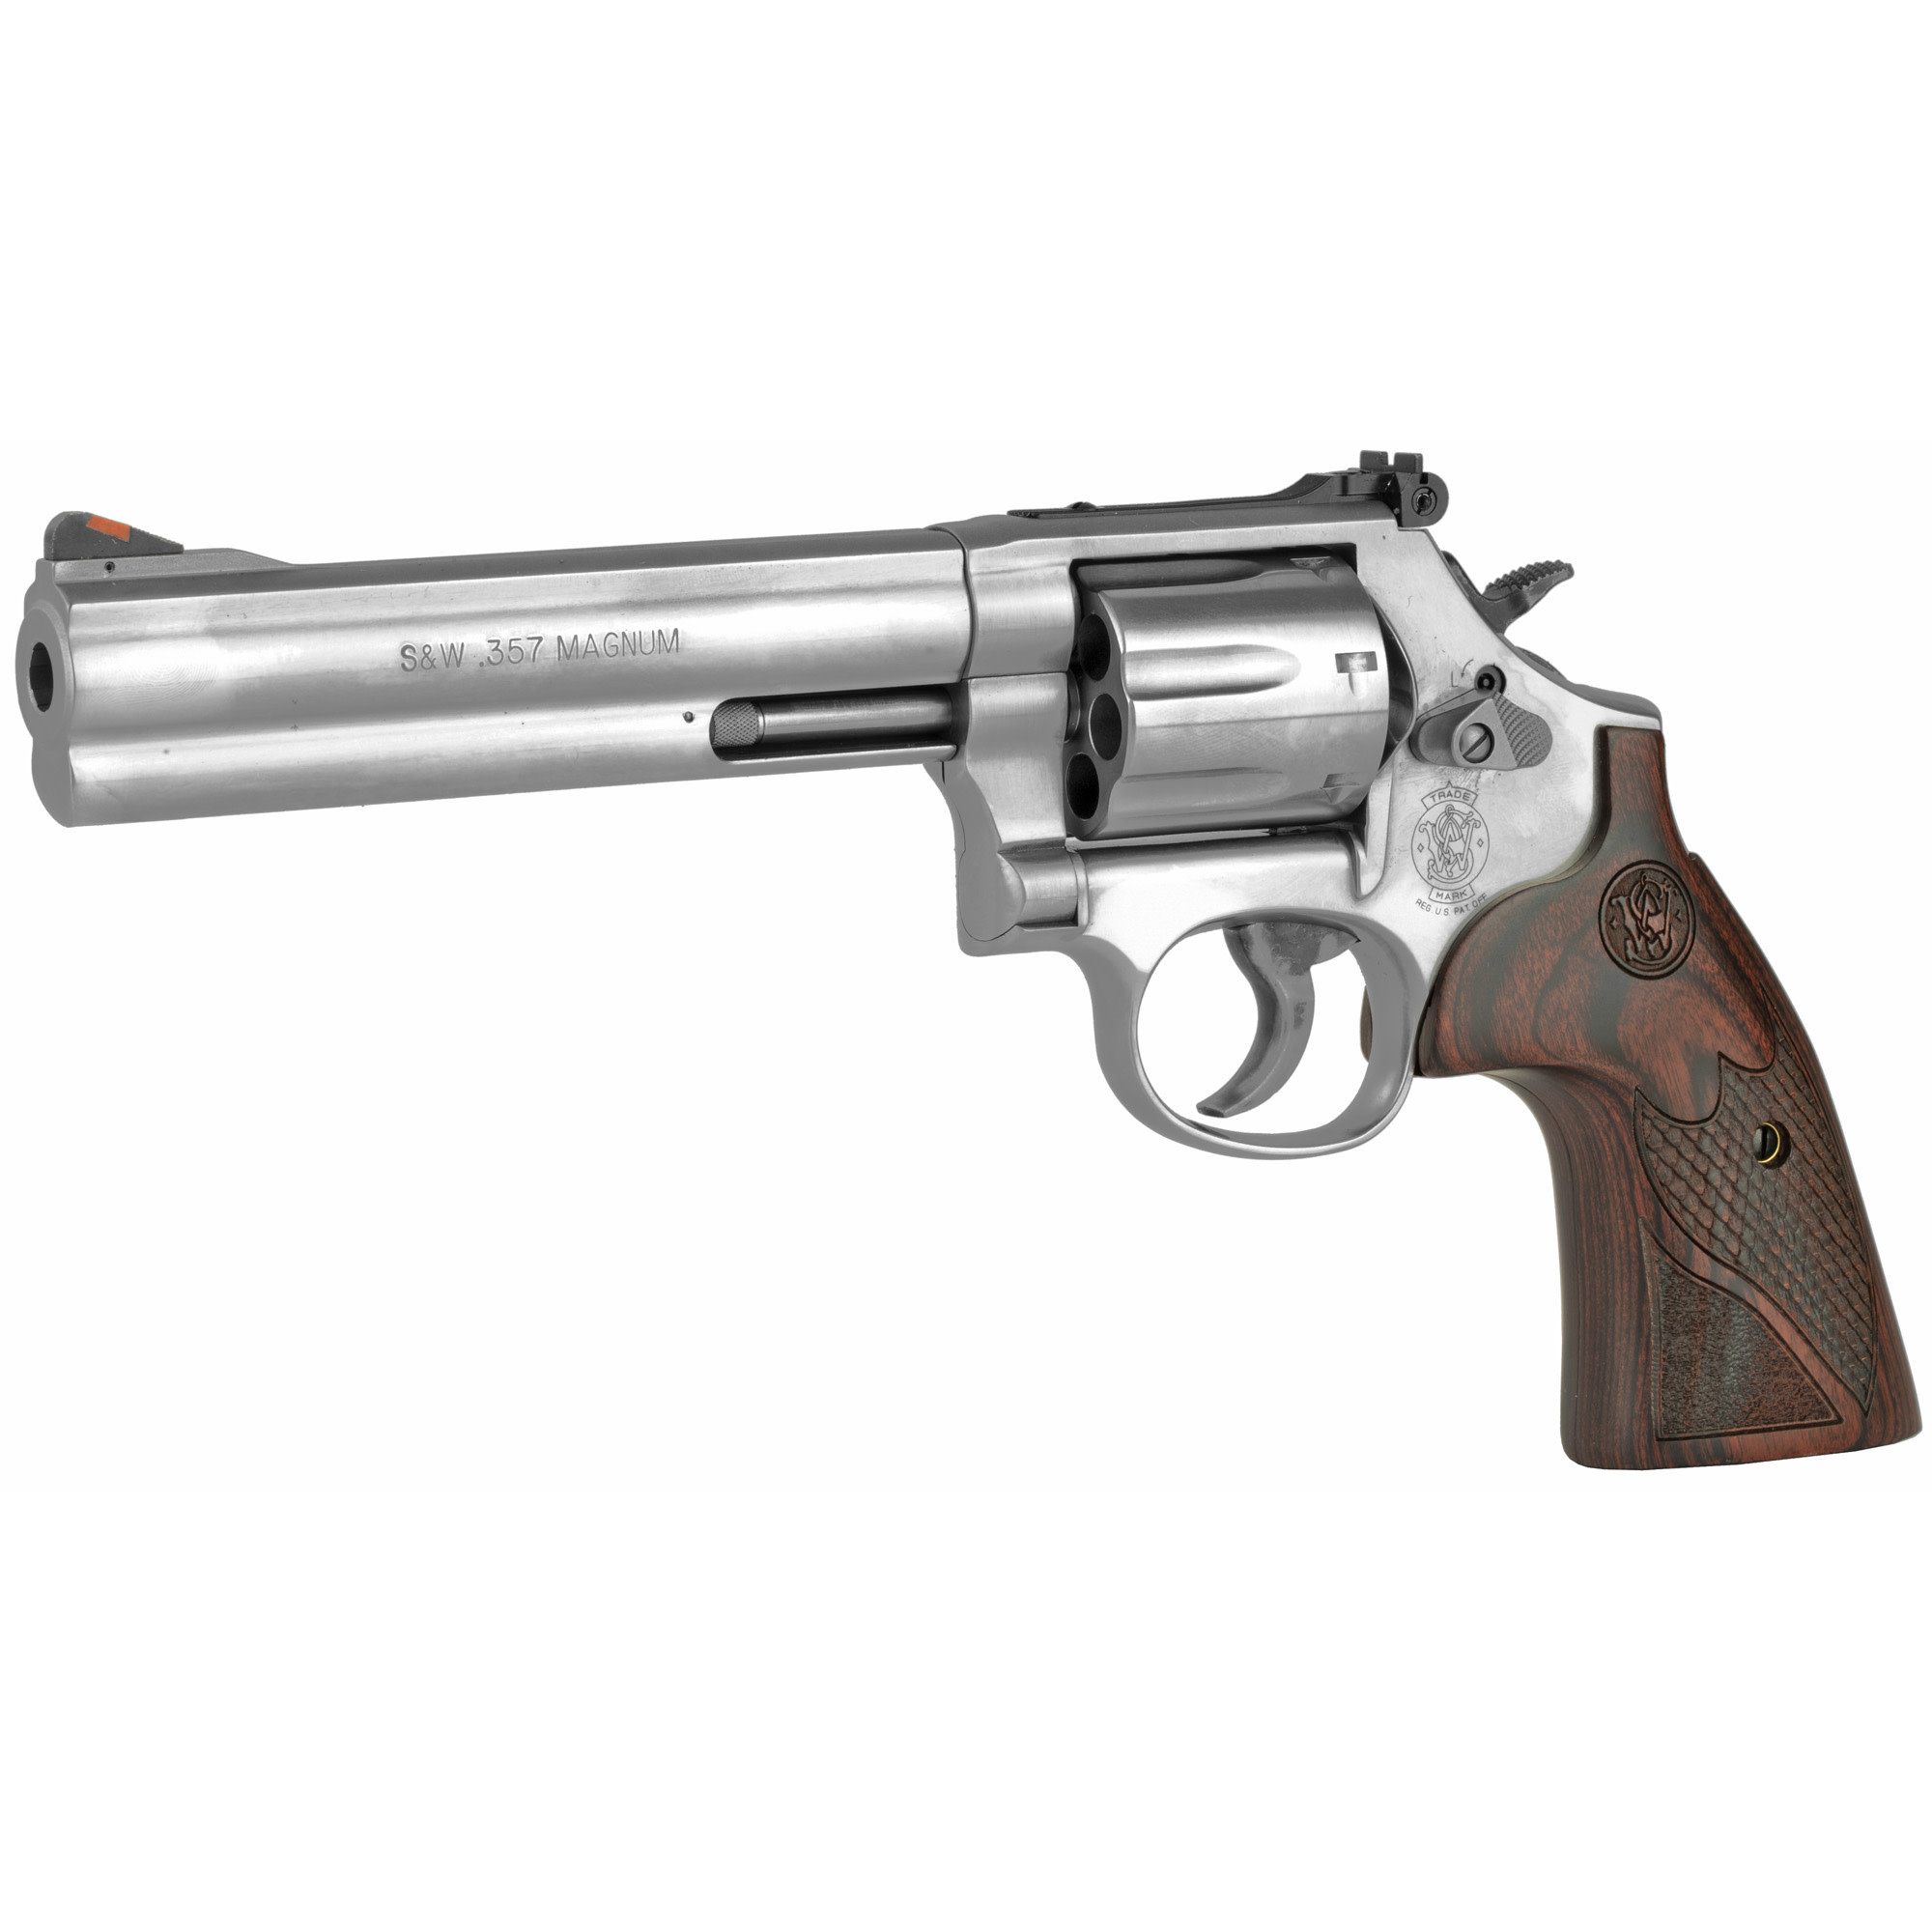 Smith & Wesson 686 Plus Deluxe 357MAG/38 SPL+P 6" SS/WOOD 7RD Revolver